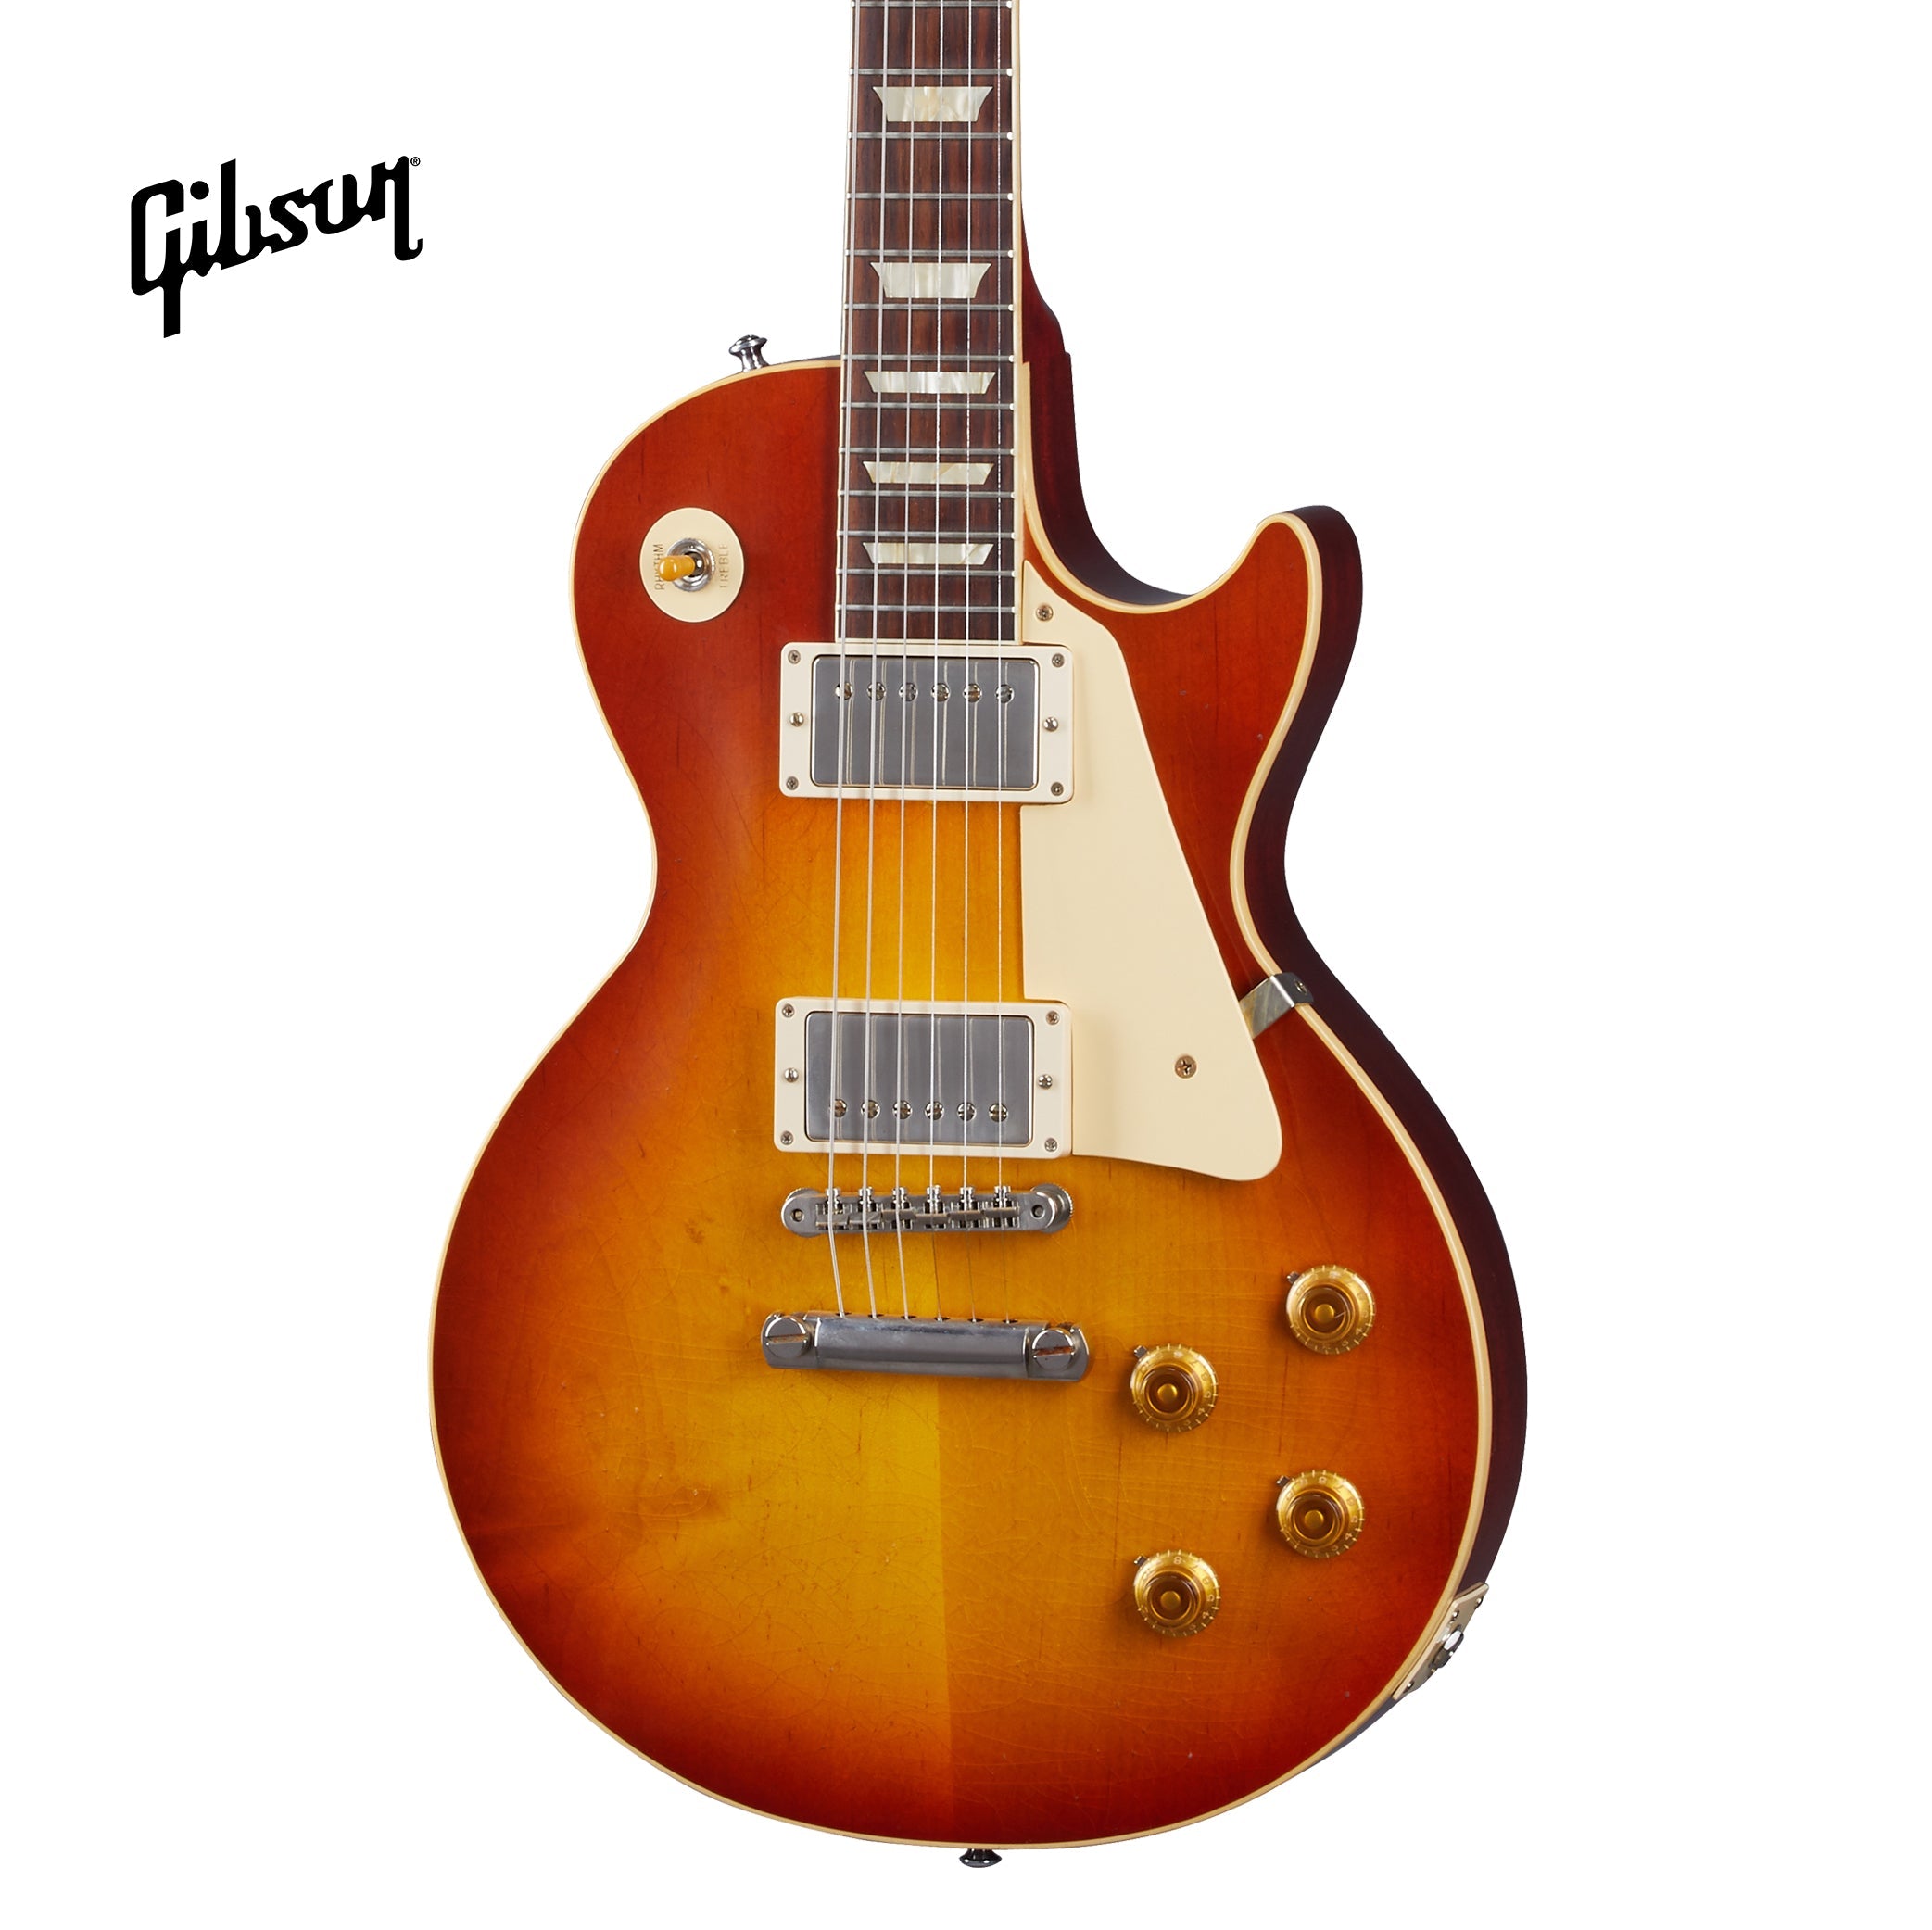 GIBSON 1958 LES PAUL STANDARD REISSUE ULTRA LIGHT AGED ELECTRIC GUITAR - WASHED CHERRY SUNBURST